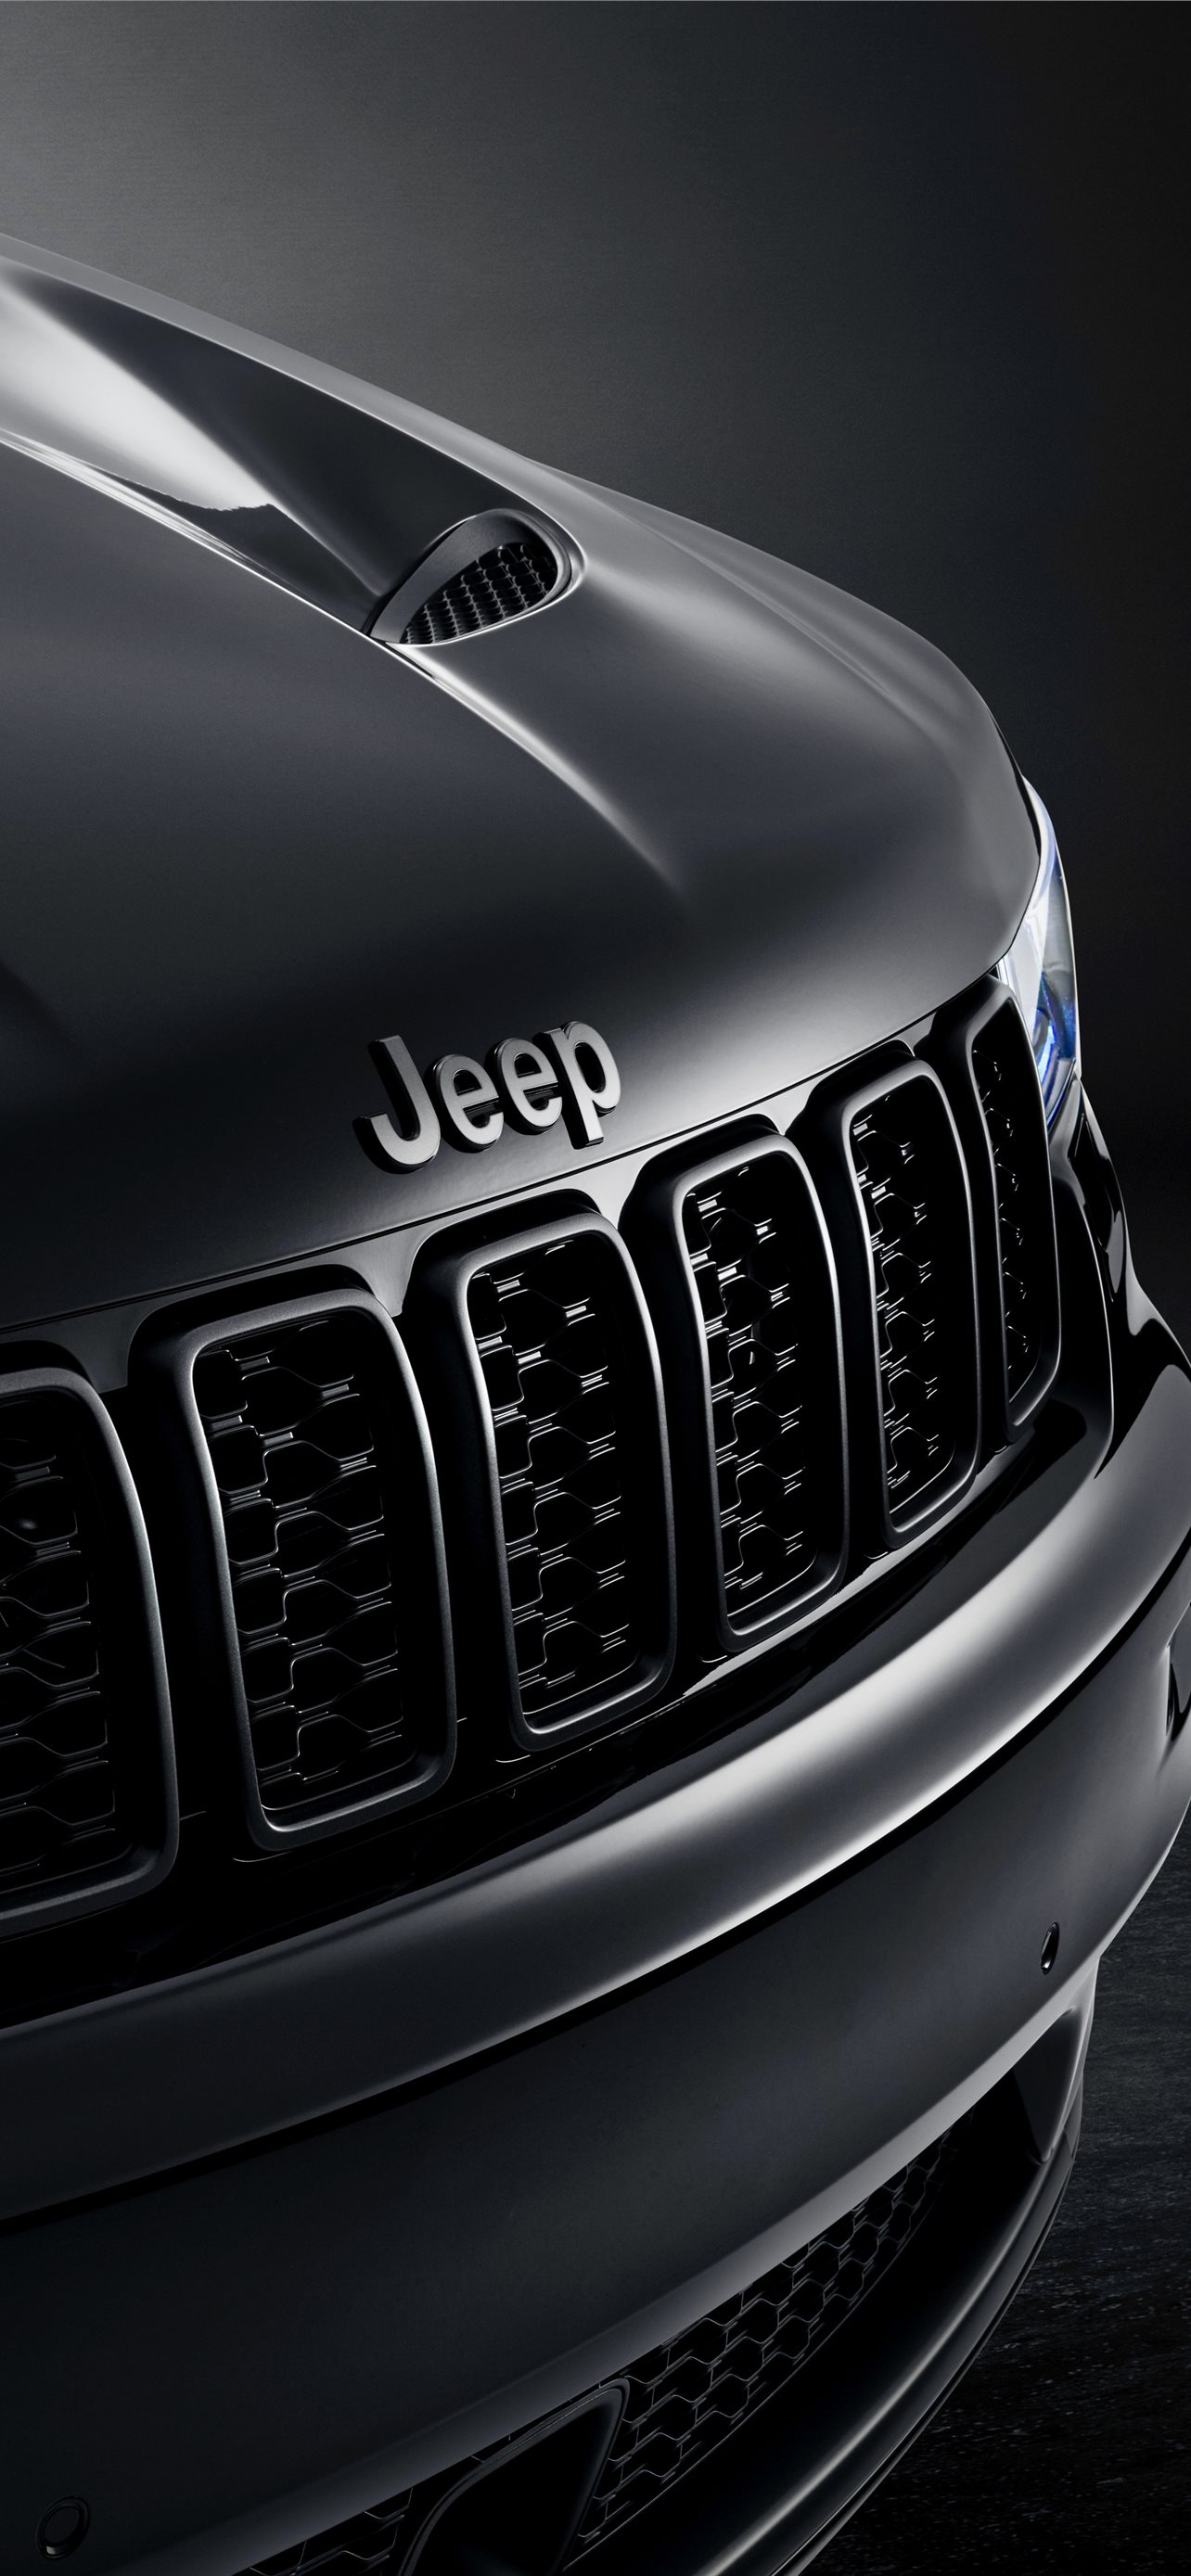 Wallpaper jeep 2015 grand cherokee srt8 hd picture image